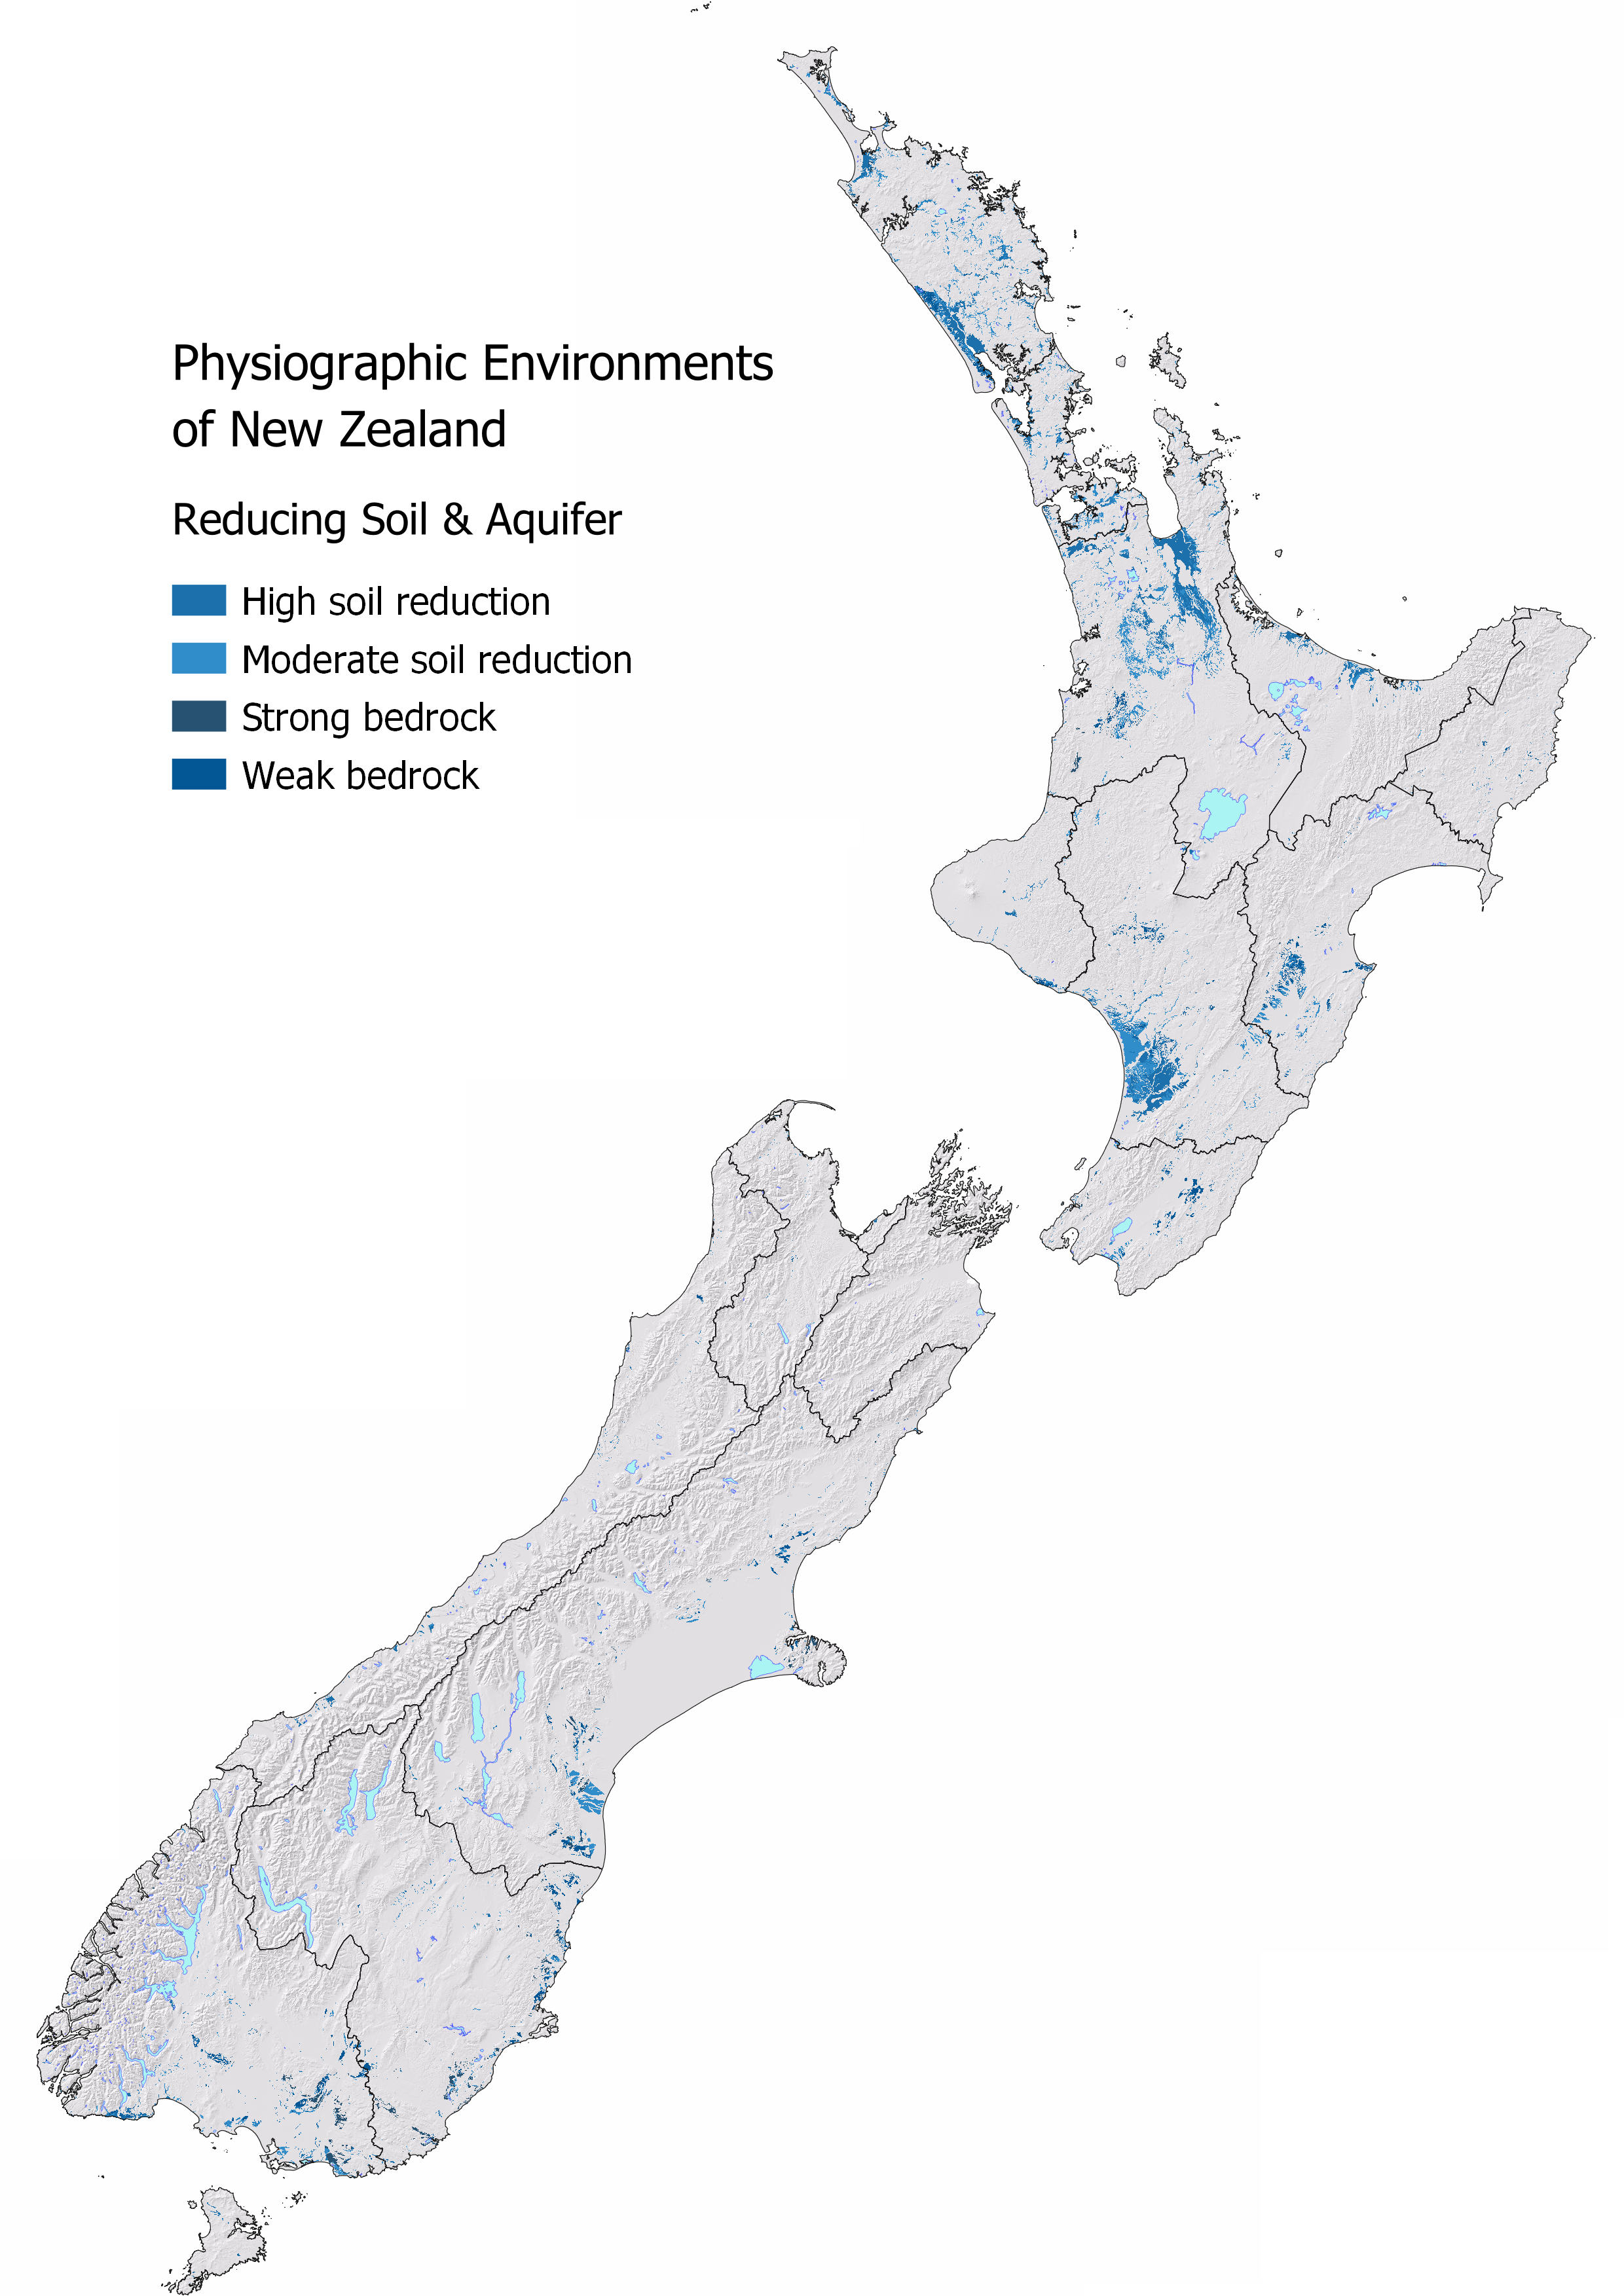 slope map of new zealand with the parts classified as 'Reducing Soil over Reducing Aquifer' showing.